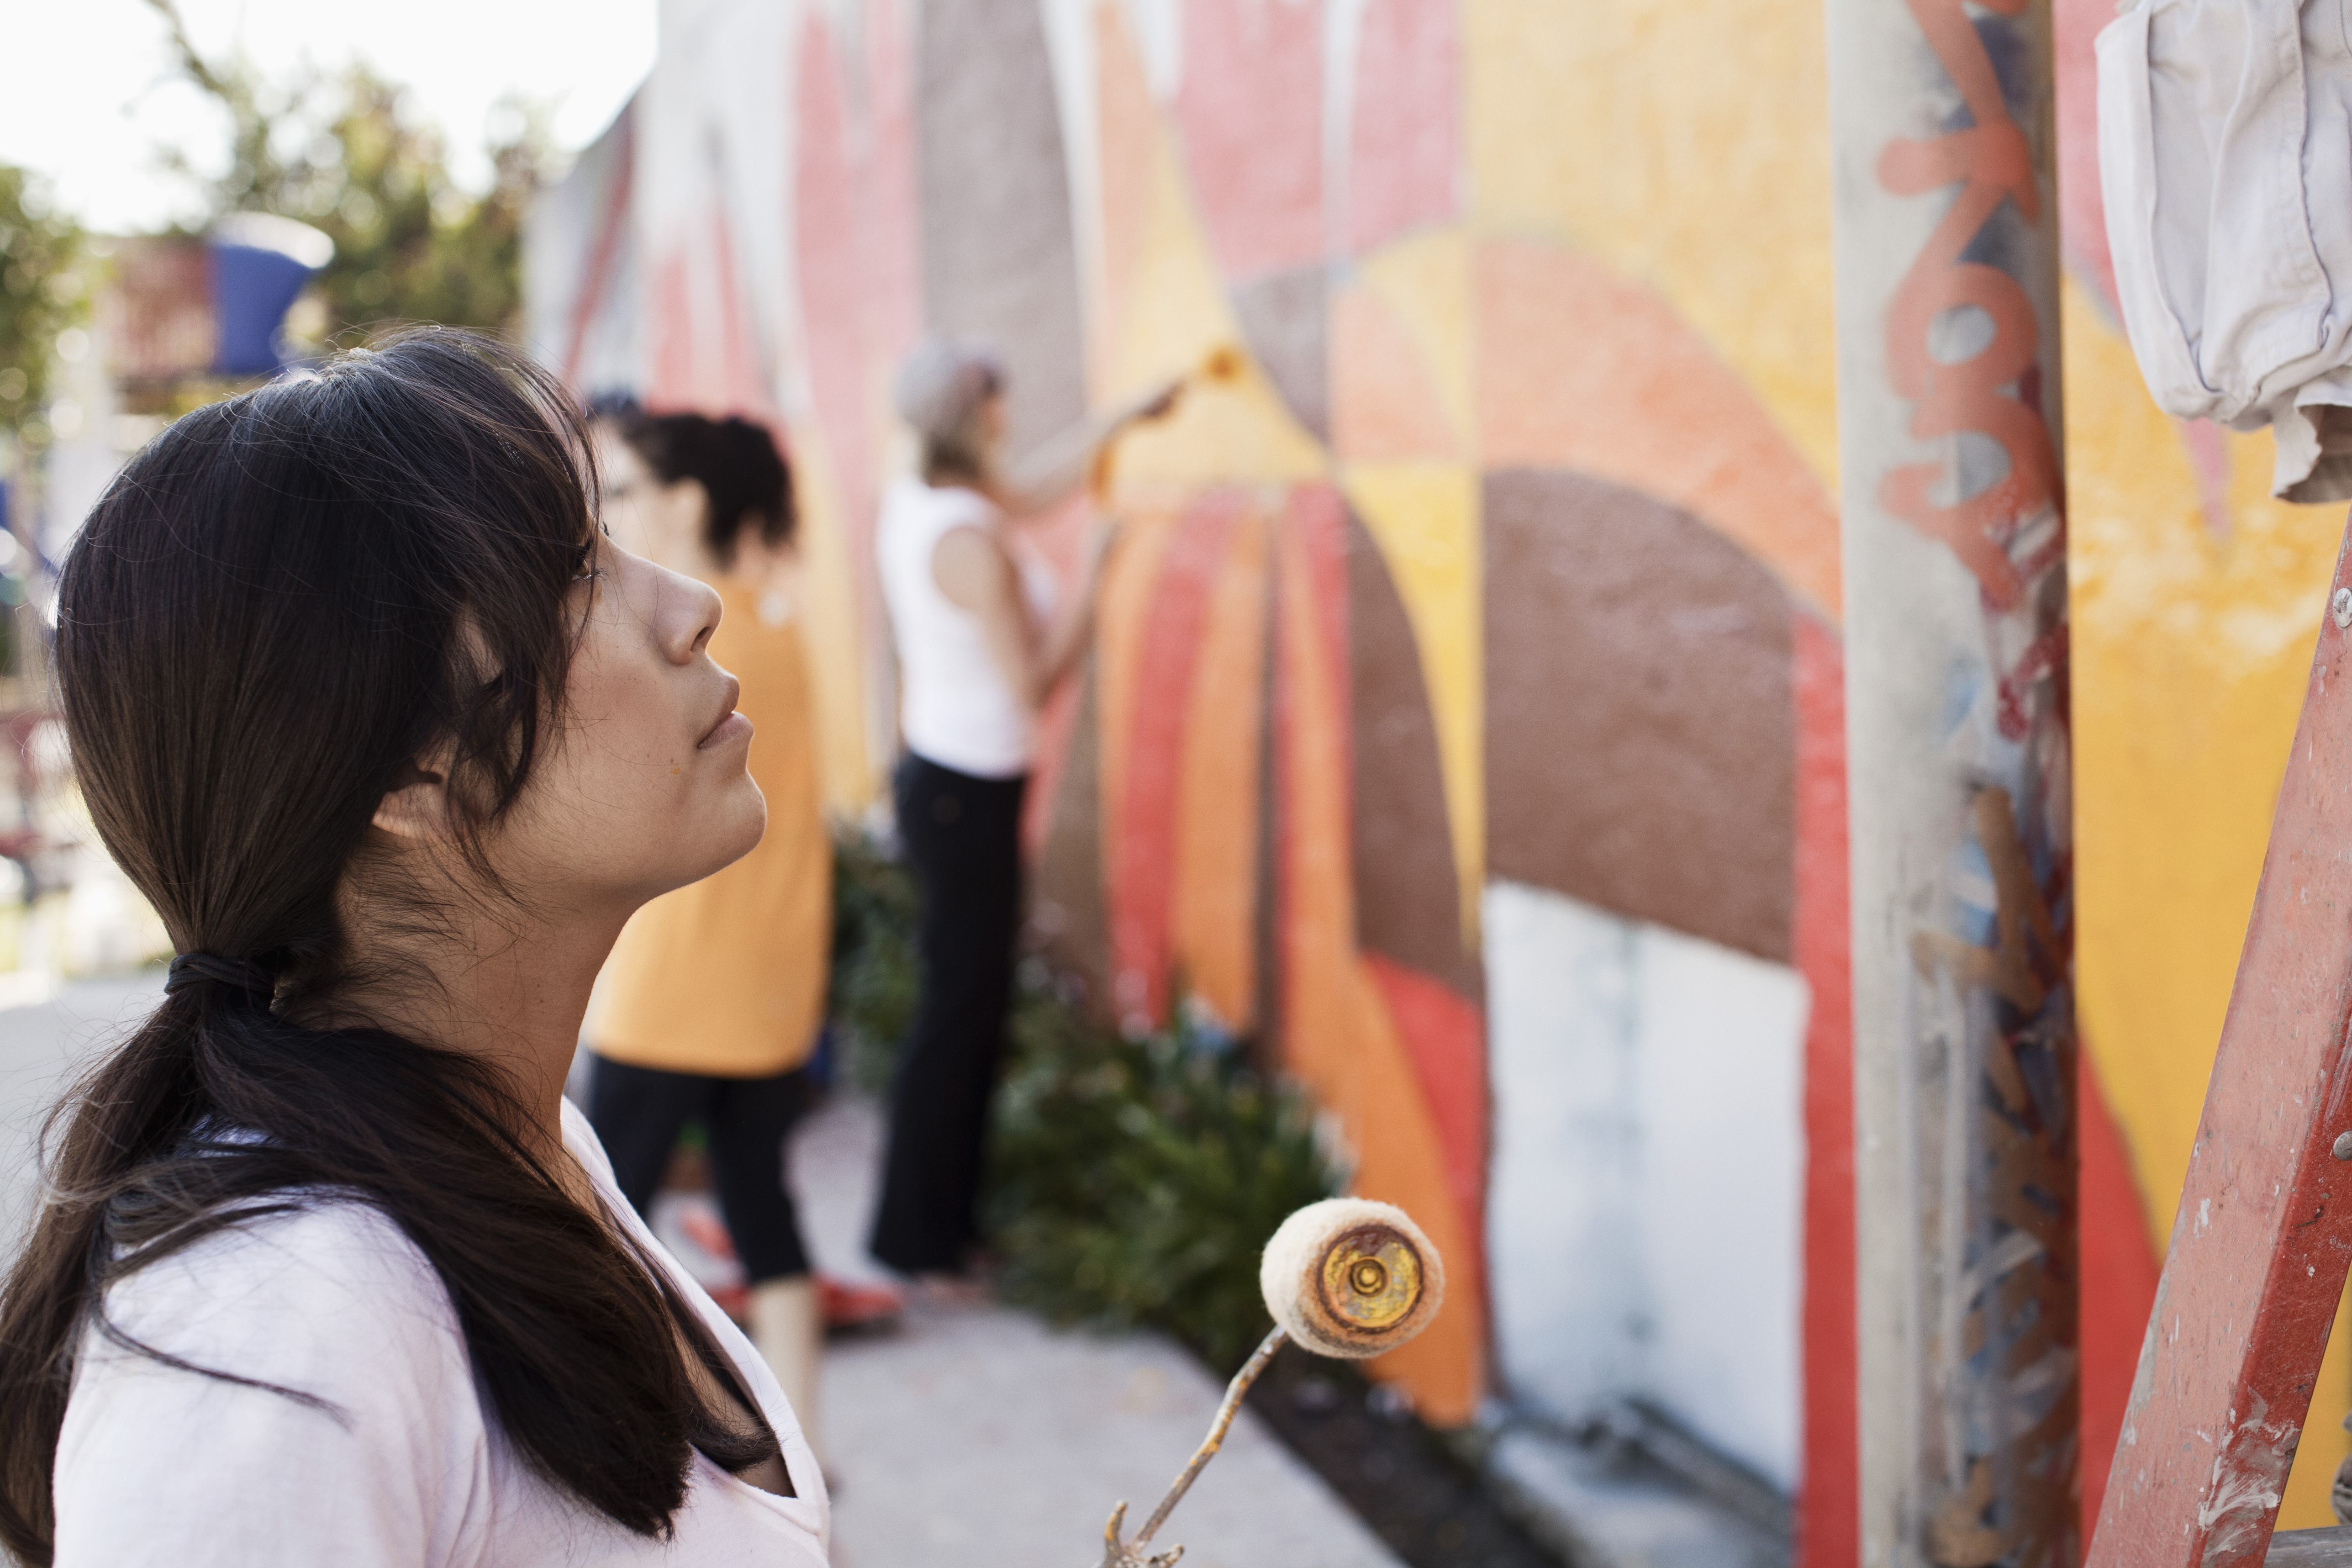 Image of a woman holding paint roller and staring at painted wall. Image is on the front of the report.